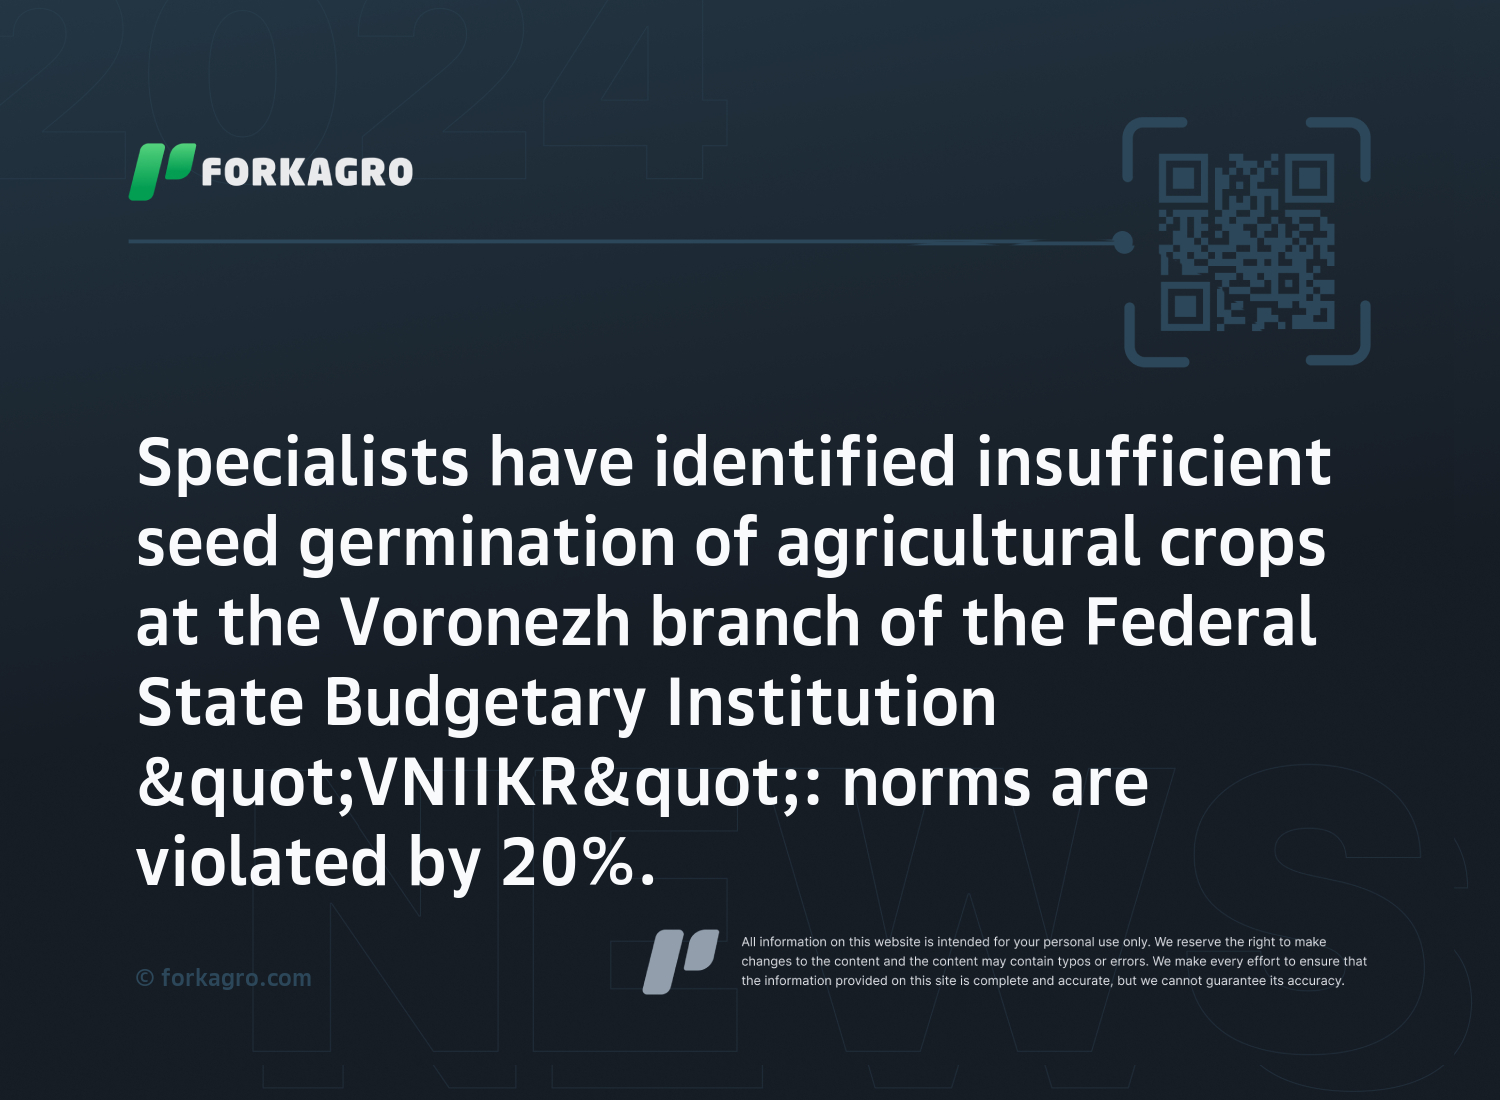 Specialists have identified insufficient seed germination of agricultural crops at the Voronezh branch of the Federal State Budgetary Institution "VNIIKR": norms are violated by 20%.